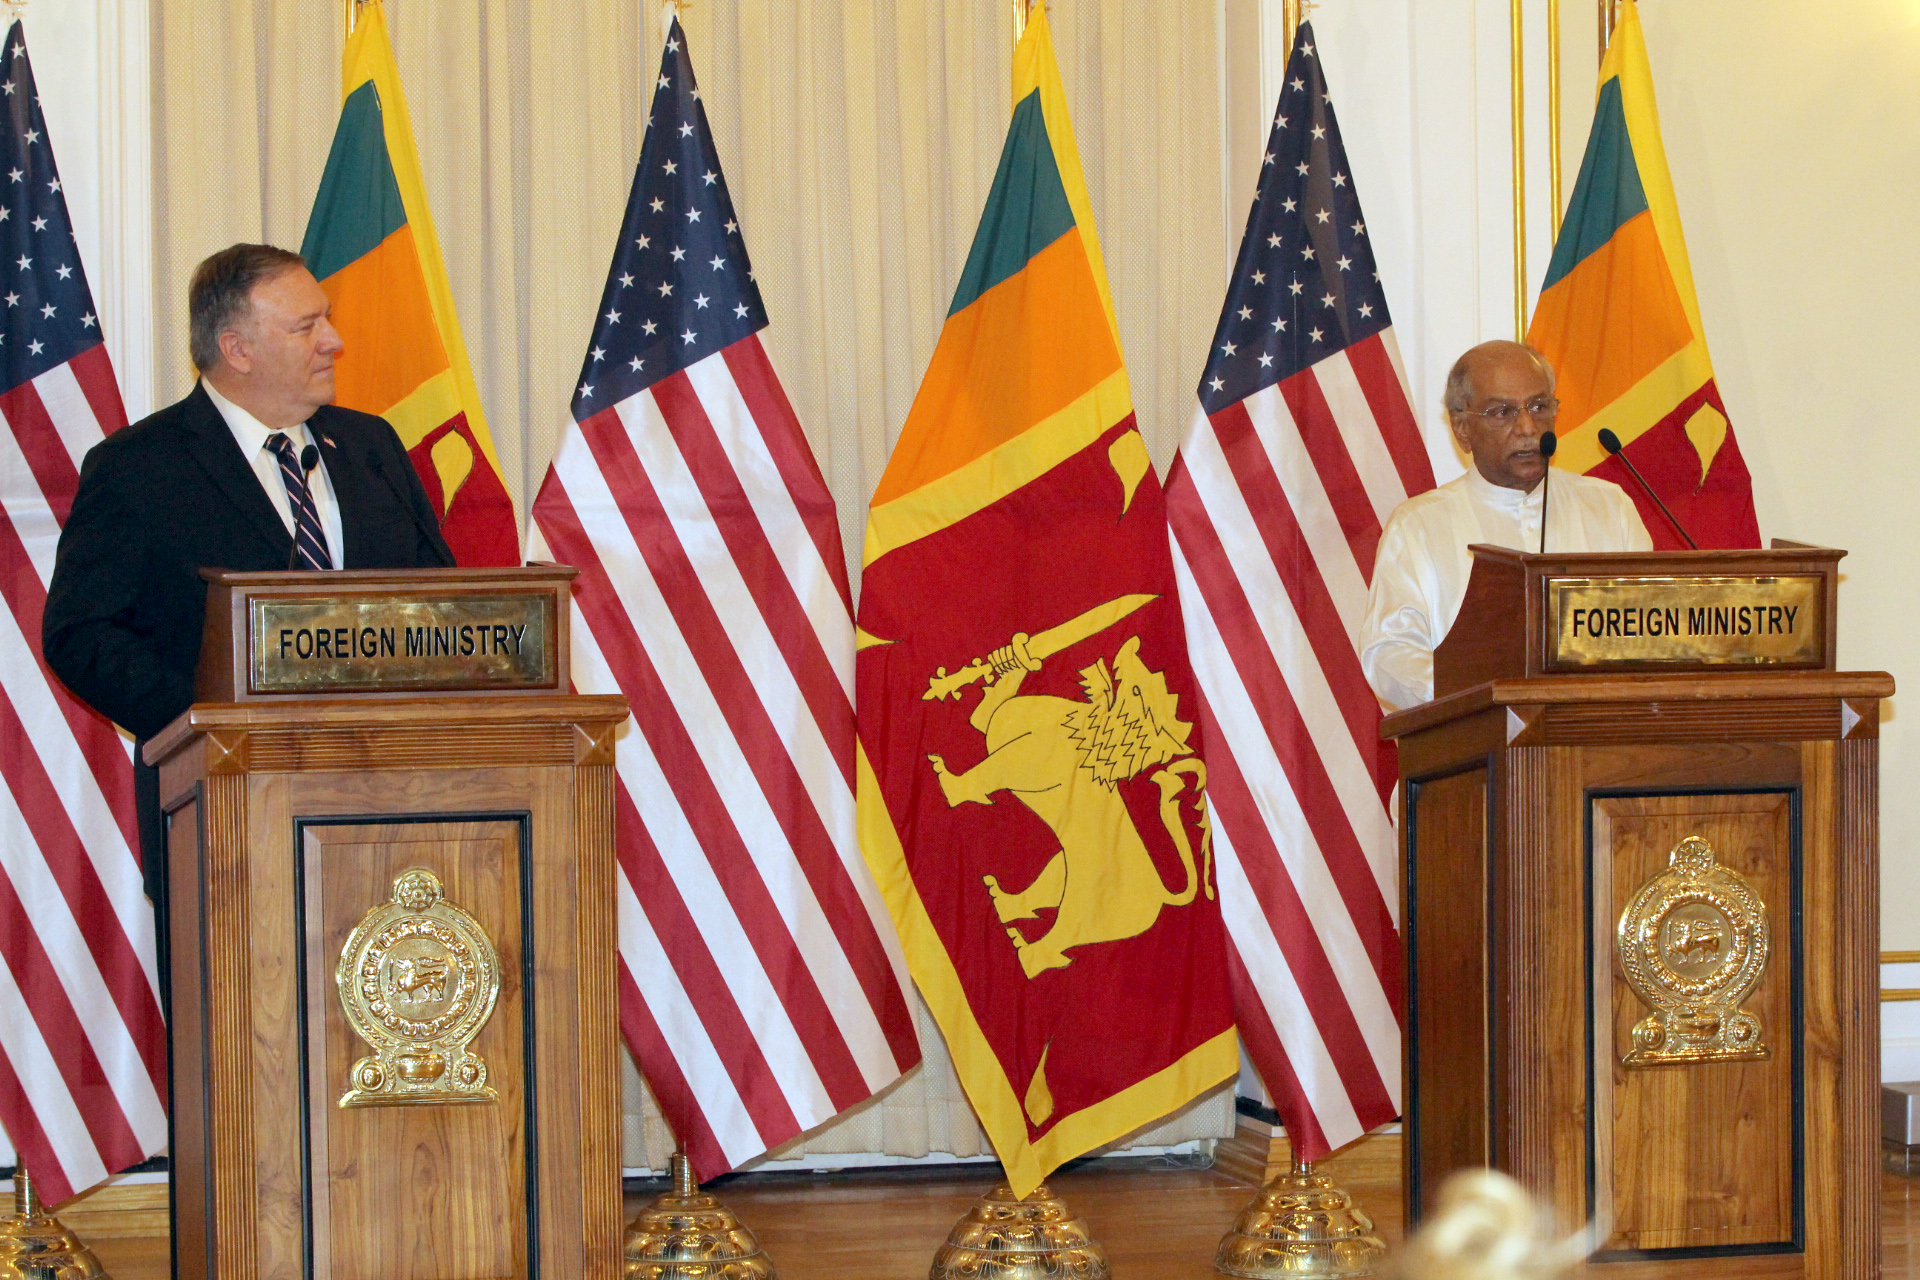 Press Statement of Hon. Dinesh Gunawardena Foreign Minister at the Joint Press event with Hon. Michael Pompeo, US Secretary of State